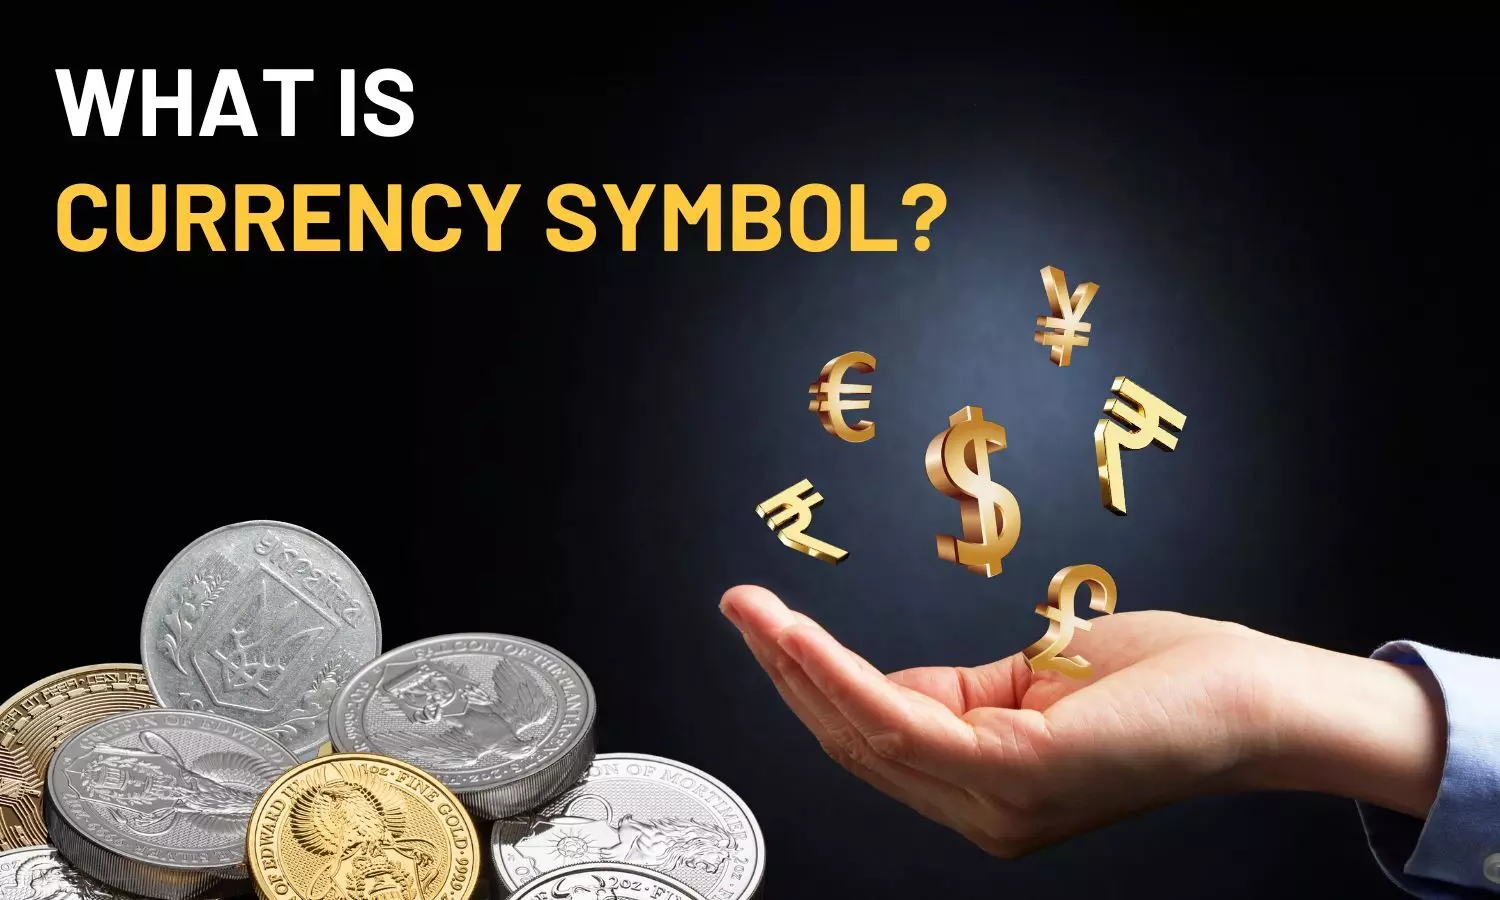 Currency Symbols Explained: What They Are and Why They Matter